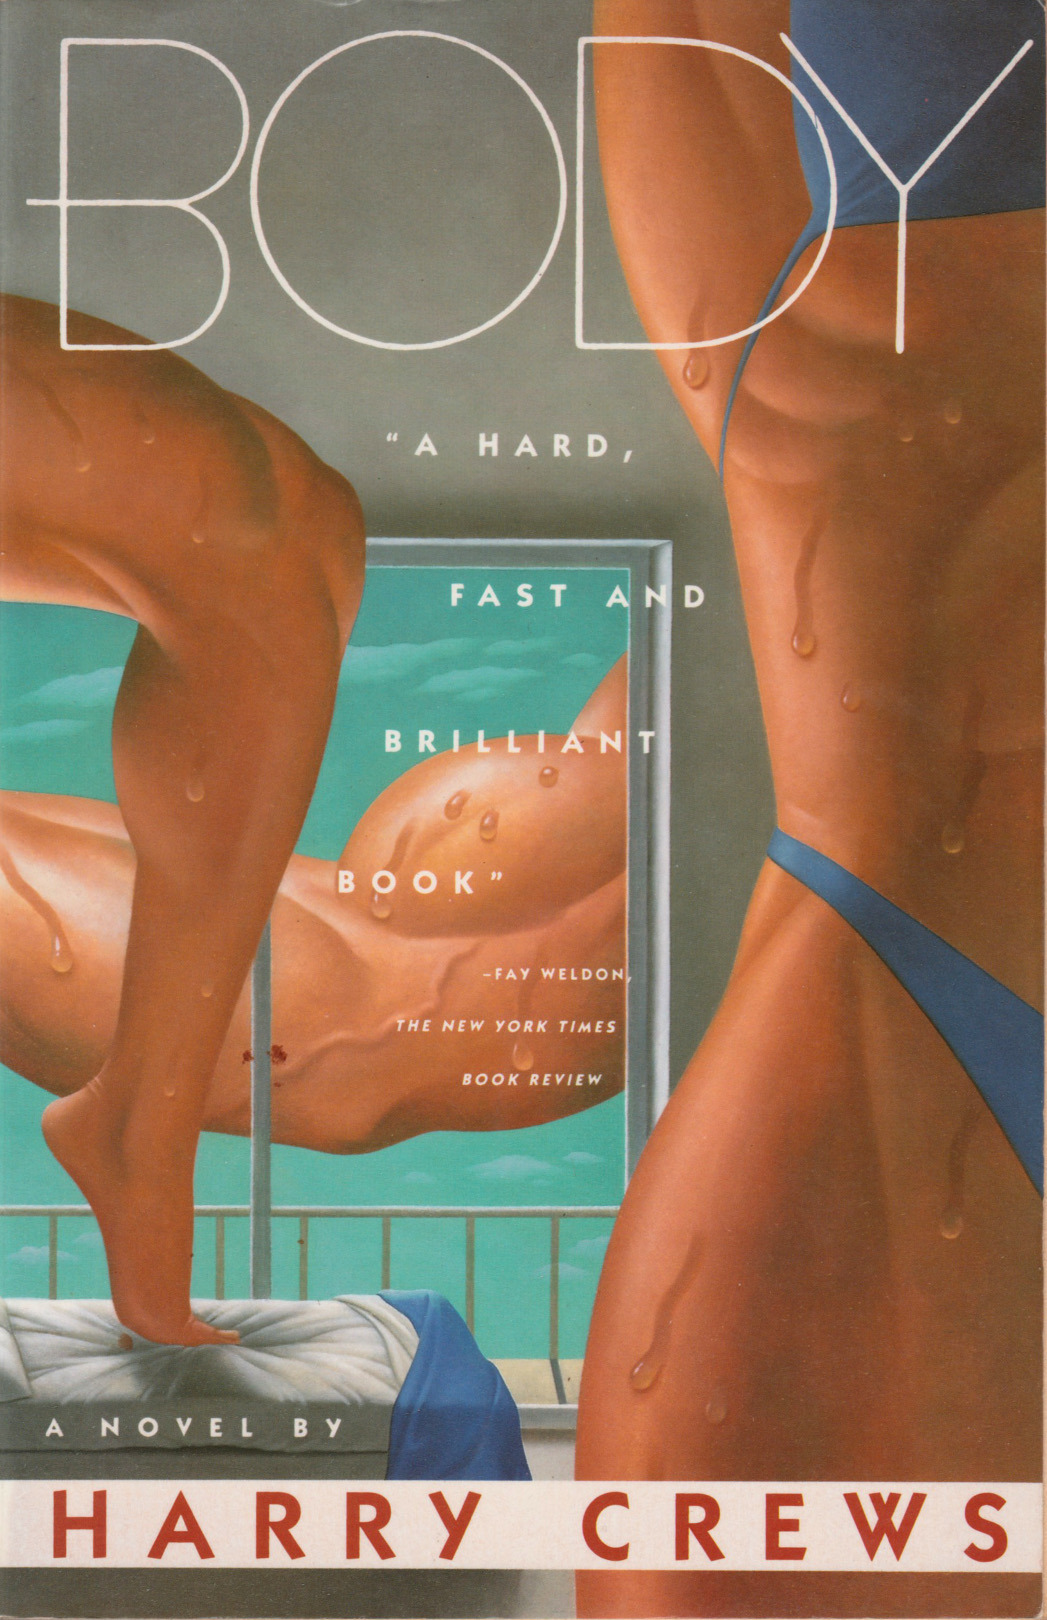 Body, by Harry Crews (Simon &amp; Schuster, 1990). From a charity shop in Nottingham.